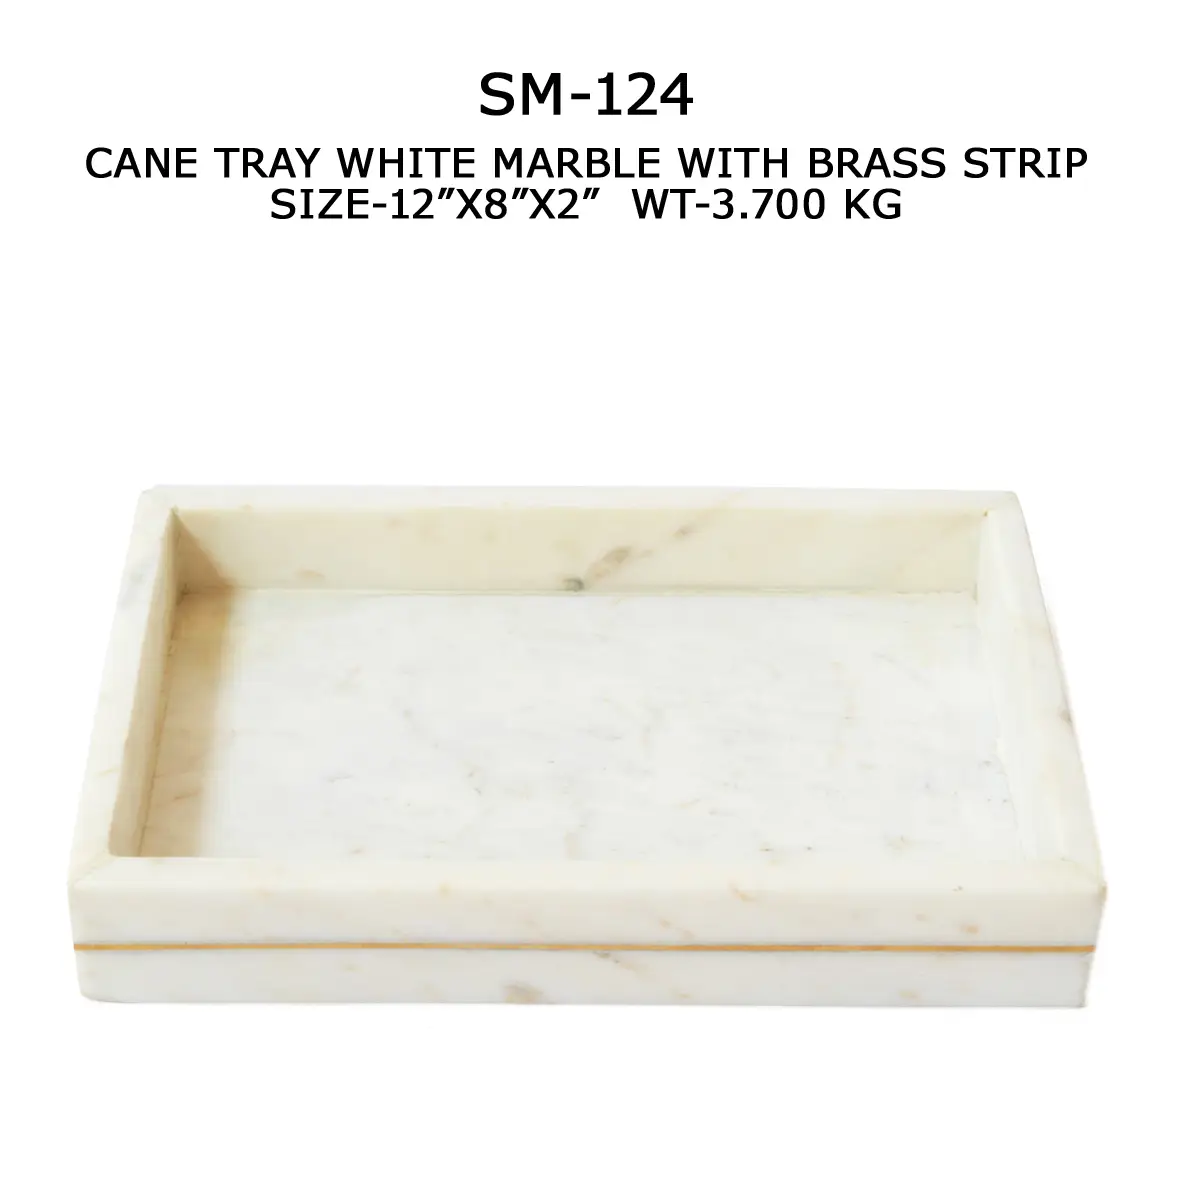 CAN TRAY WITH BRASS STRIP INLAY WHITE
MARBLE